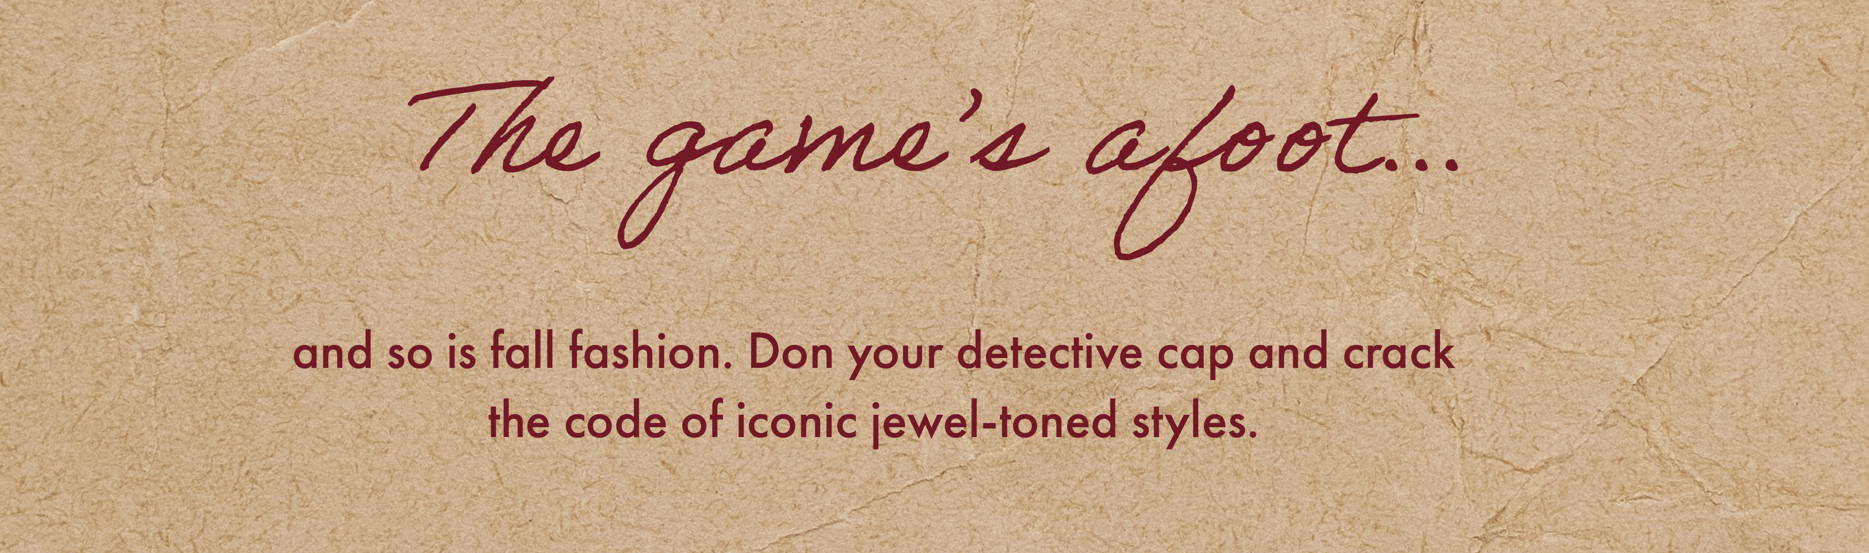 The game's afoot... and so is fall fashion. Don your detective cap and crack the code of iconic jewel-toned styles. 